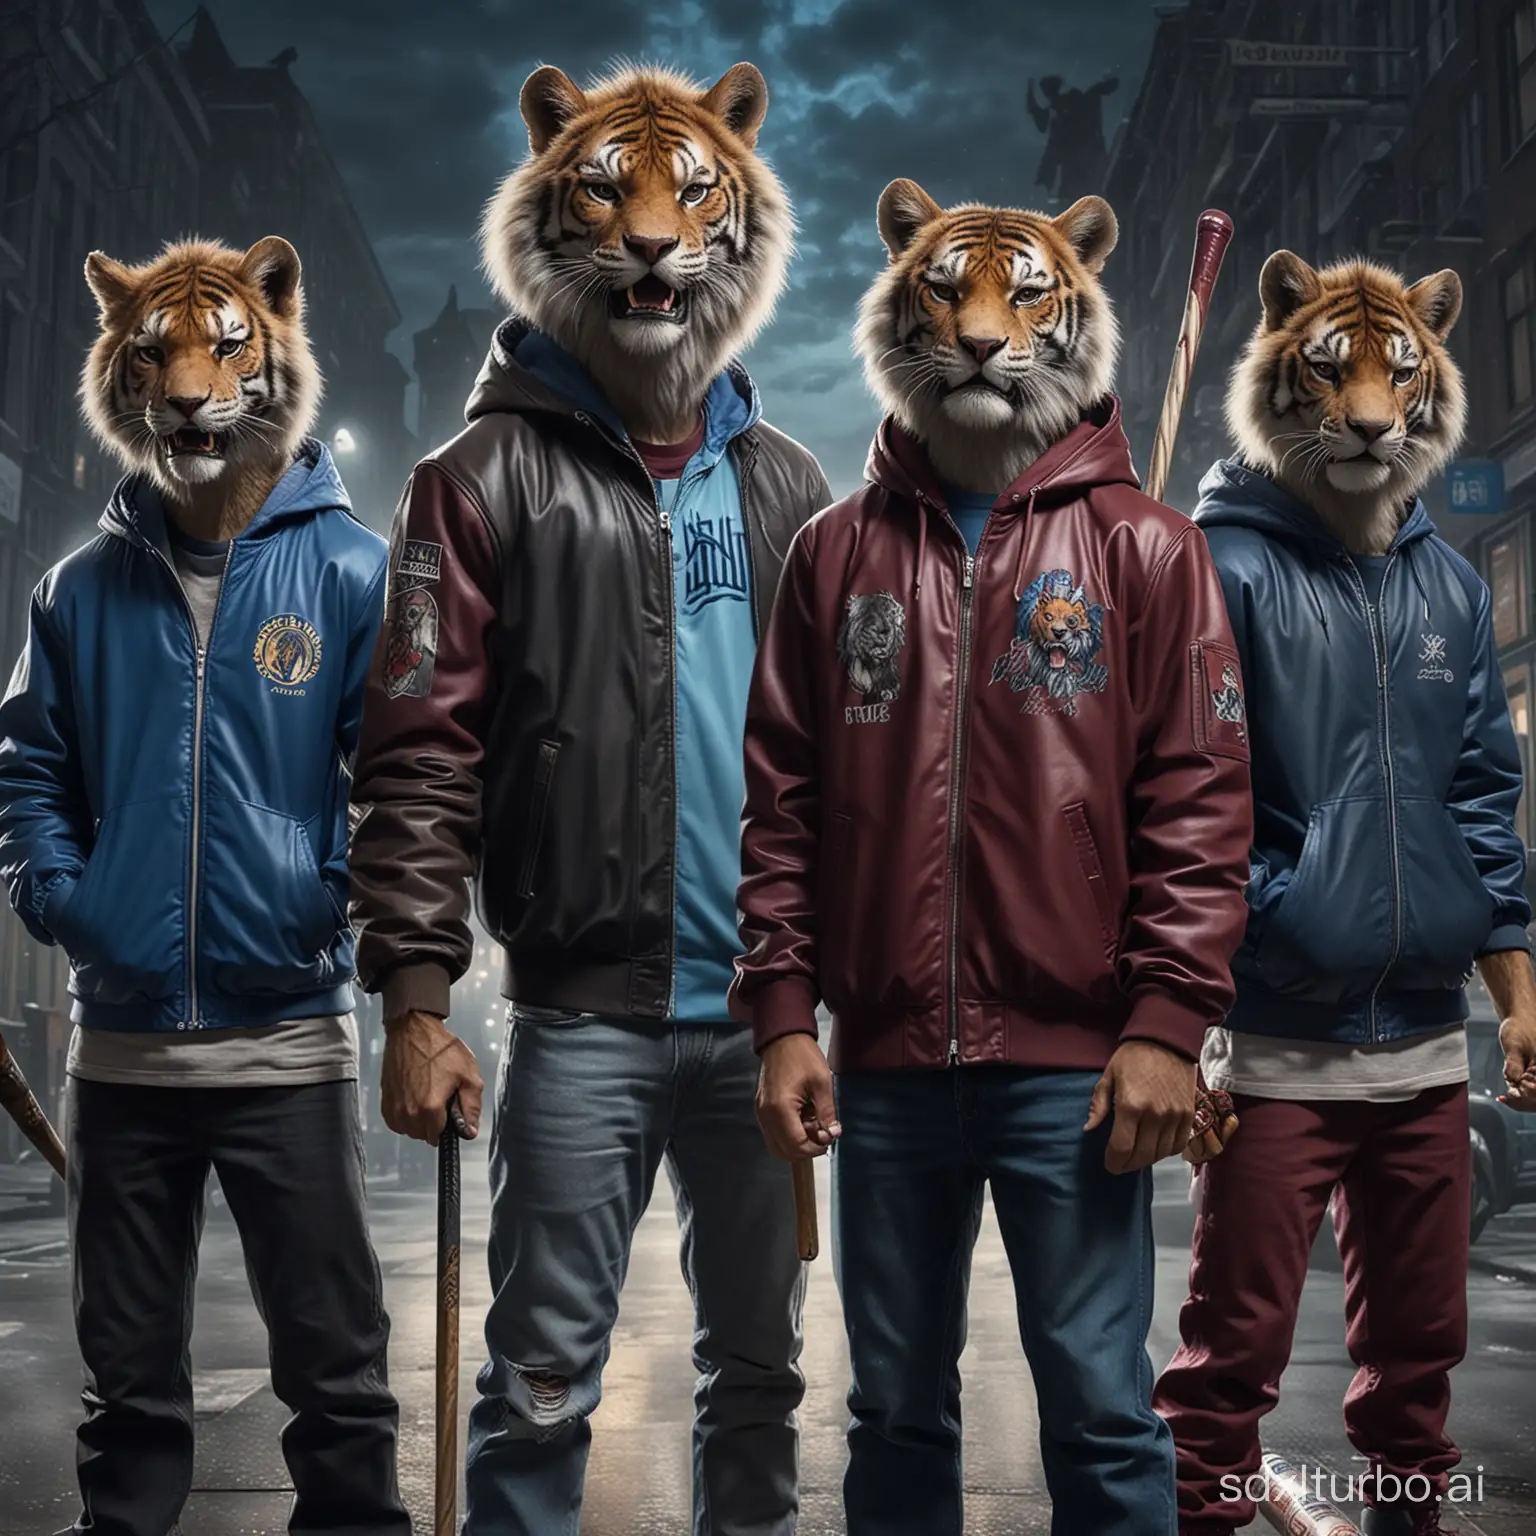 real photo, epic, dynamic pose, 4boys, 3 anthropomorphic furries, 1wolf and 1tiger and 1lion separated, angry, in black leather jacket, in burgundy and gray windbreaker, in blue sweatshirt, standing Russian outside at night, movie poster, with baseball bat in hand, with montage in hand